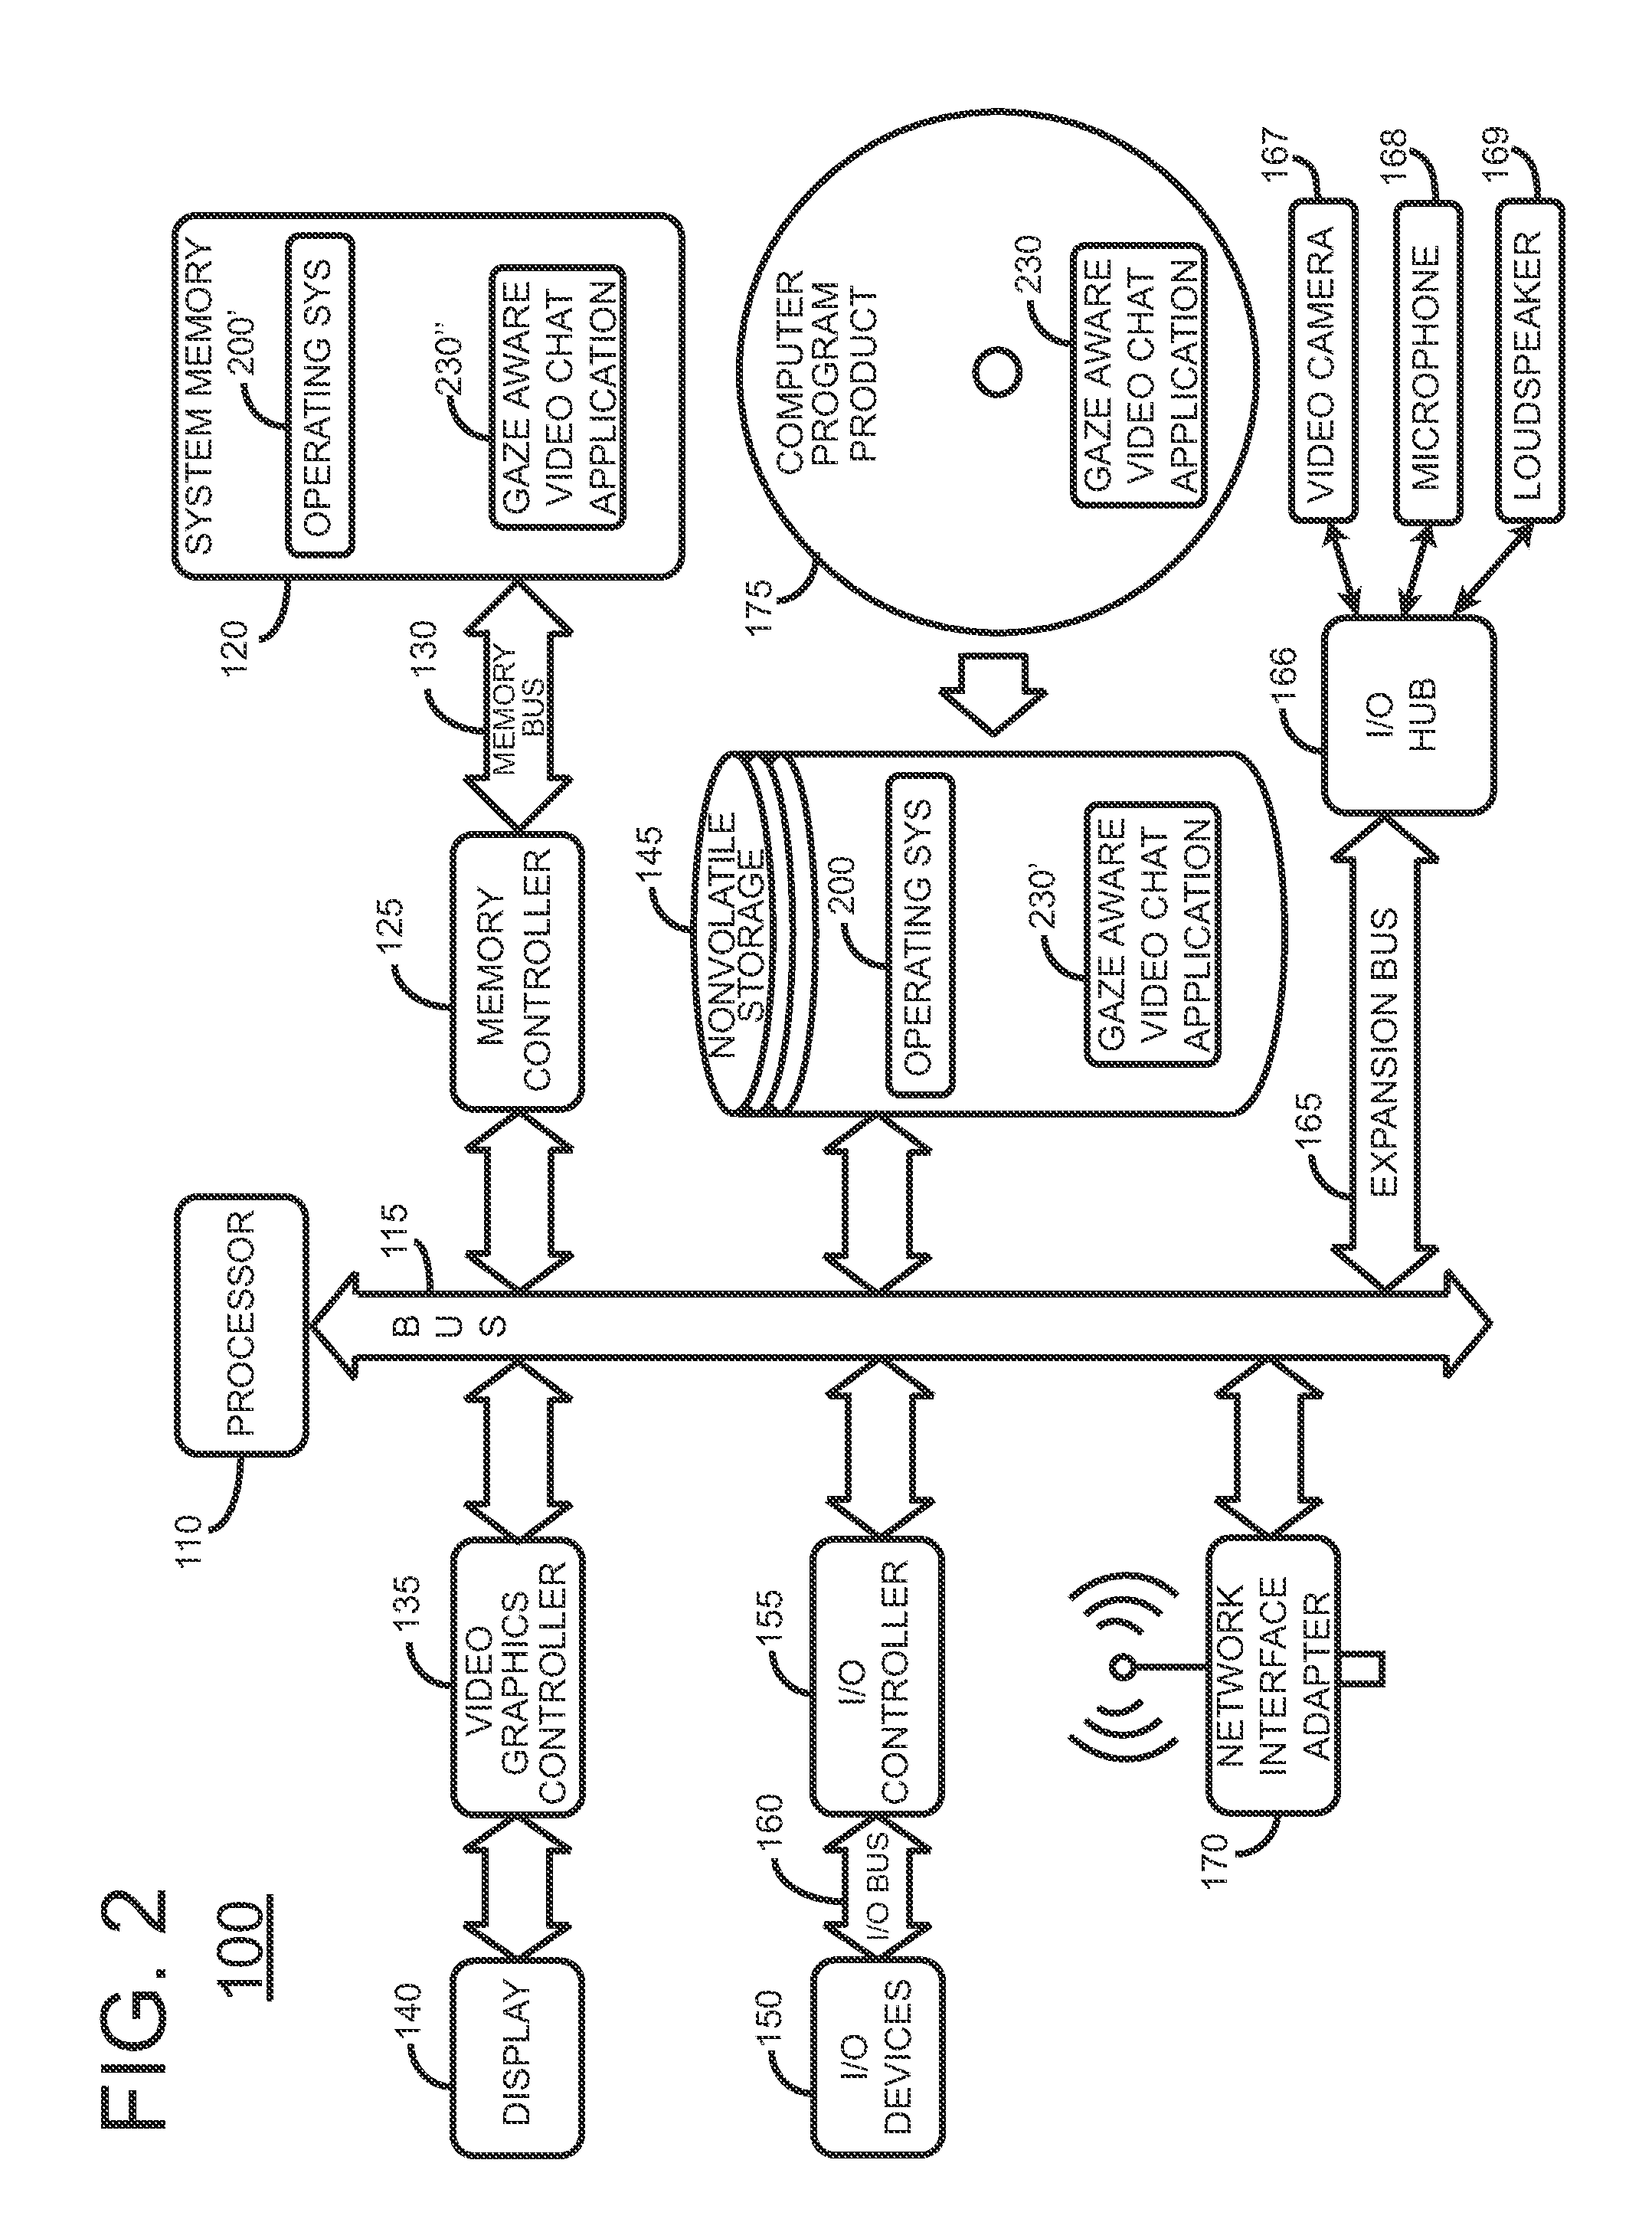 Multi-participant audio/video communication system with participant role indicator